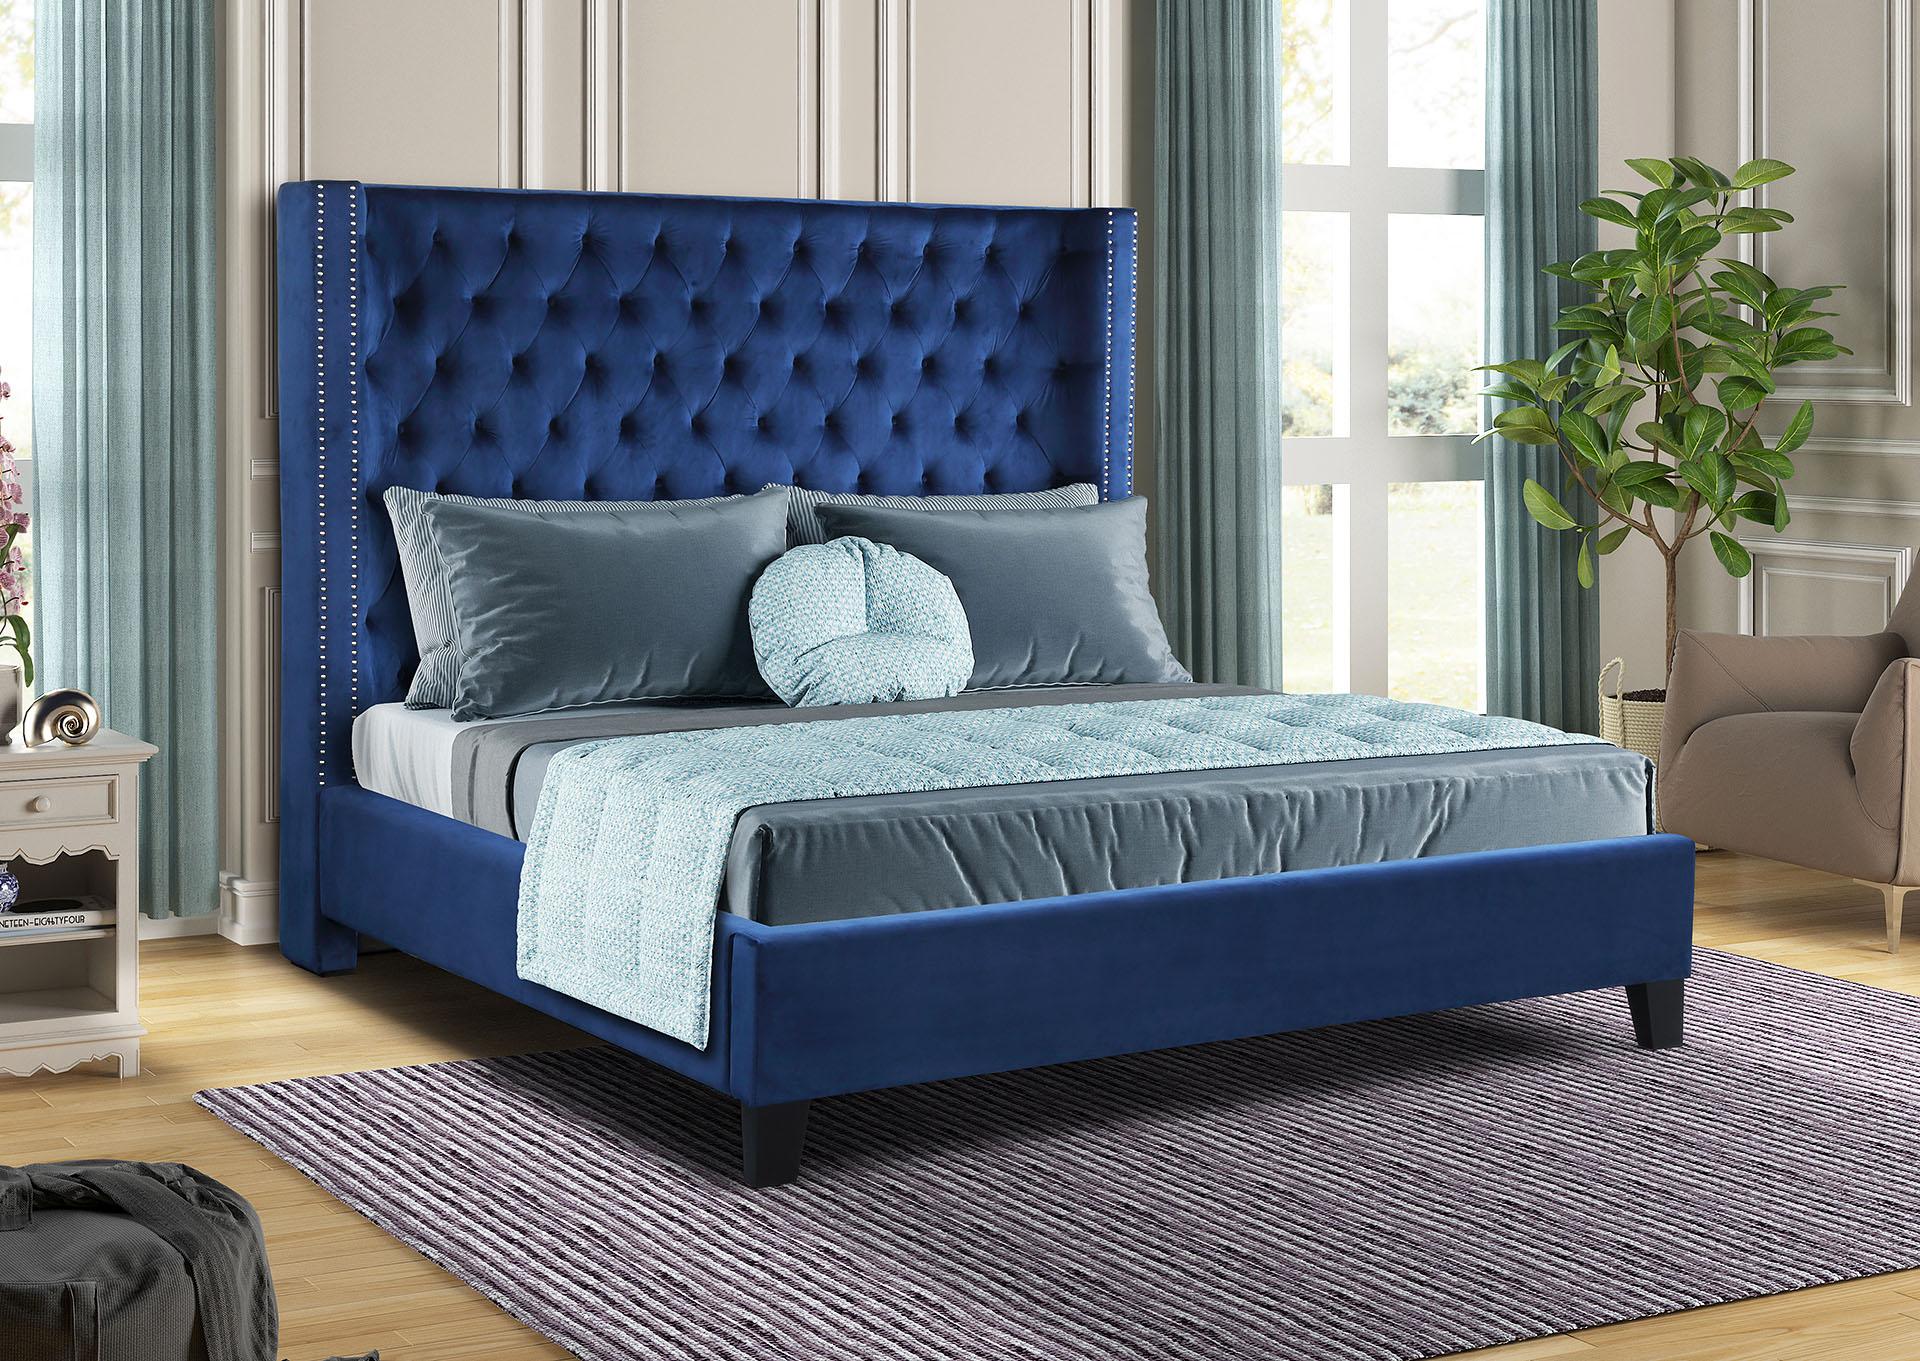 Contemporary, Modern Panel Bed ALLEN GHF-808857974082 in Blue Fabric